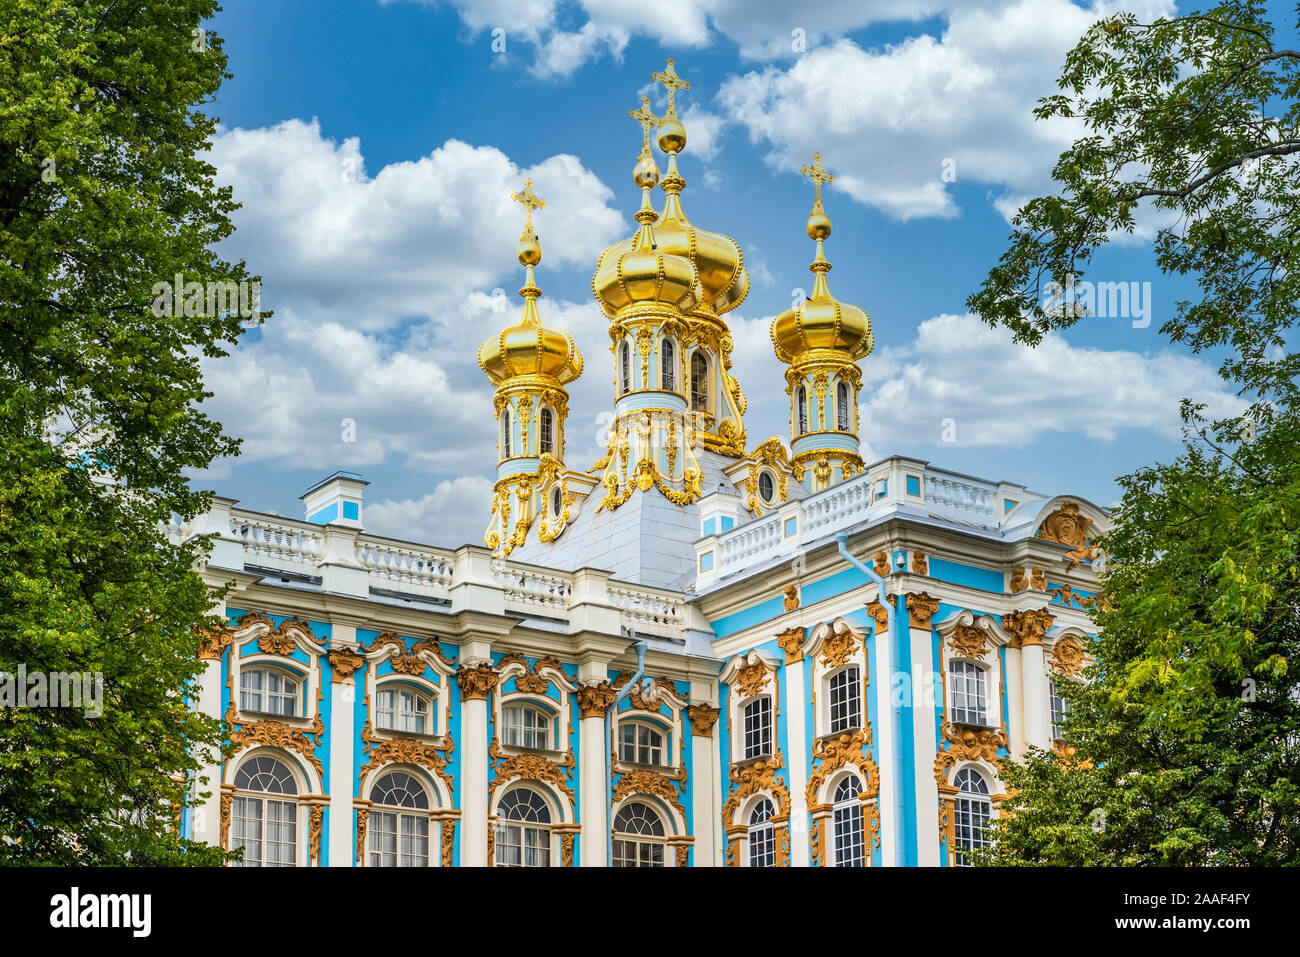 The golden spires of the Church Of The Resurrection in Catherine's Palace in St. Petersburg, Russia. Stock Photo